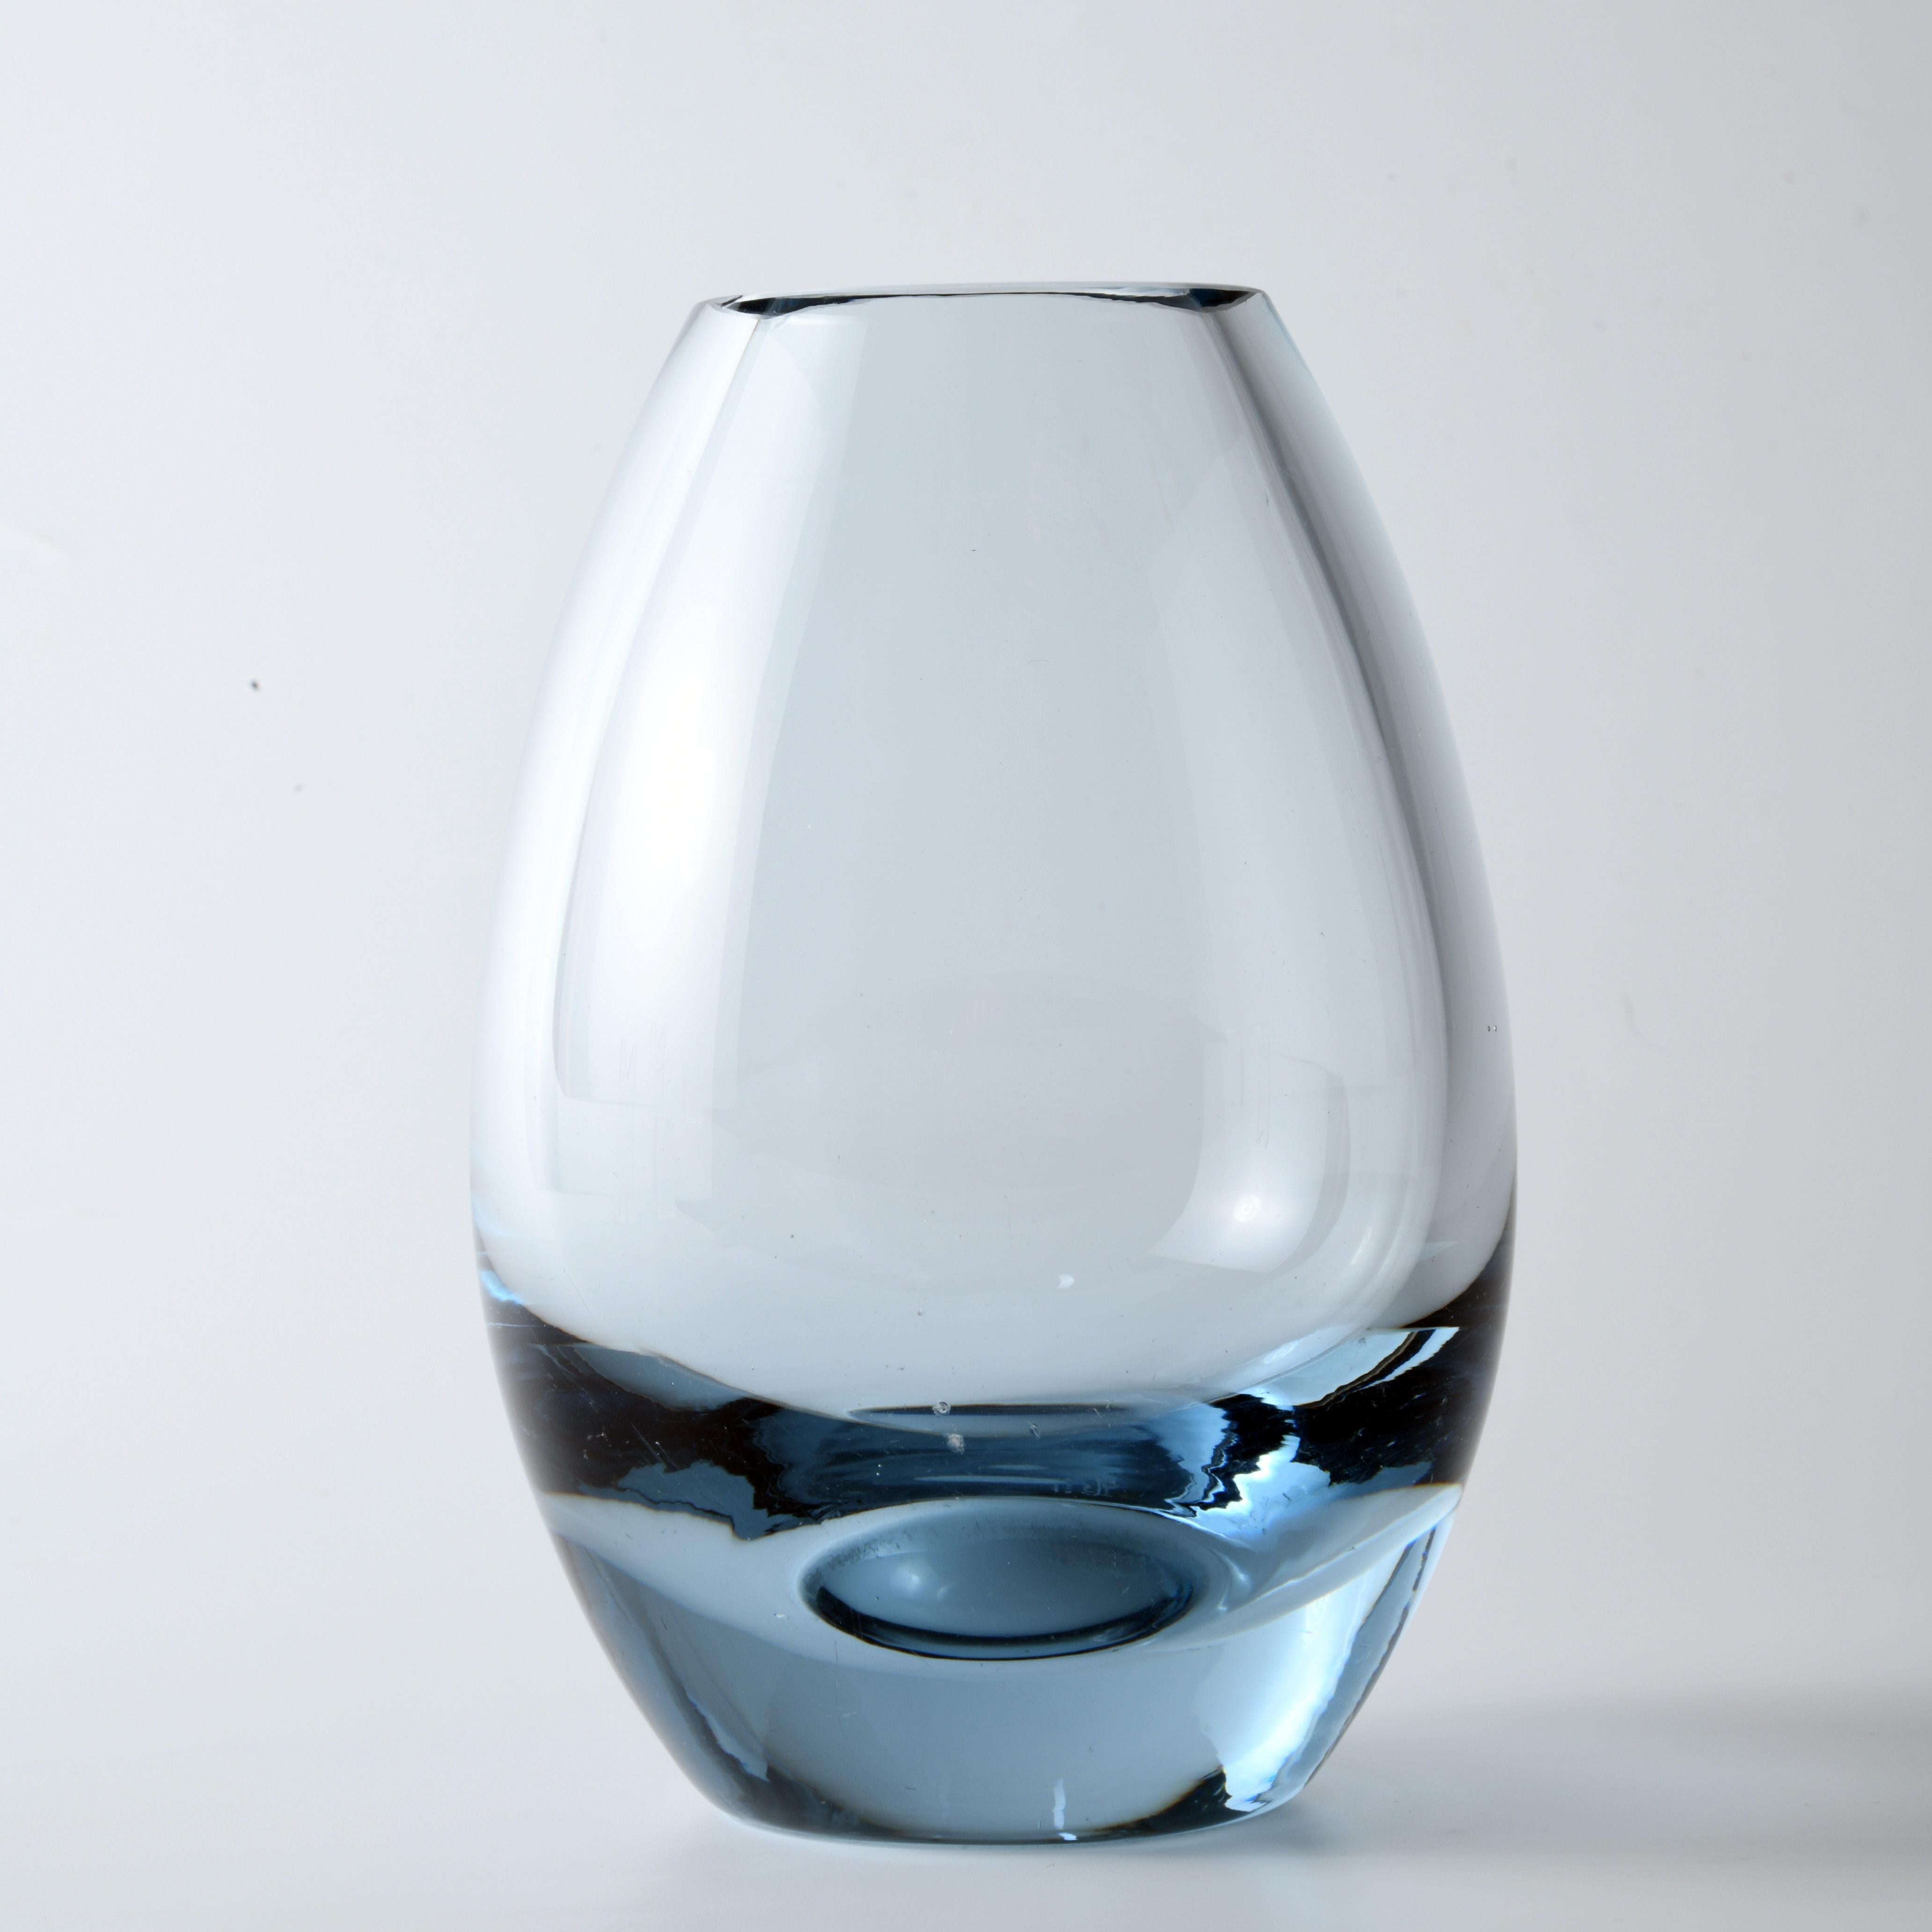 Small glass vase, designed in 1962 by Per Lutken (1916-1998), published by the famous Danish glass company Holmegaard. The bluish tone, the thickness of the glass visible at the top is an integral part of the design of this vase, dated and signed